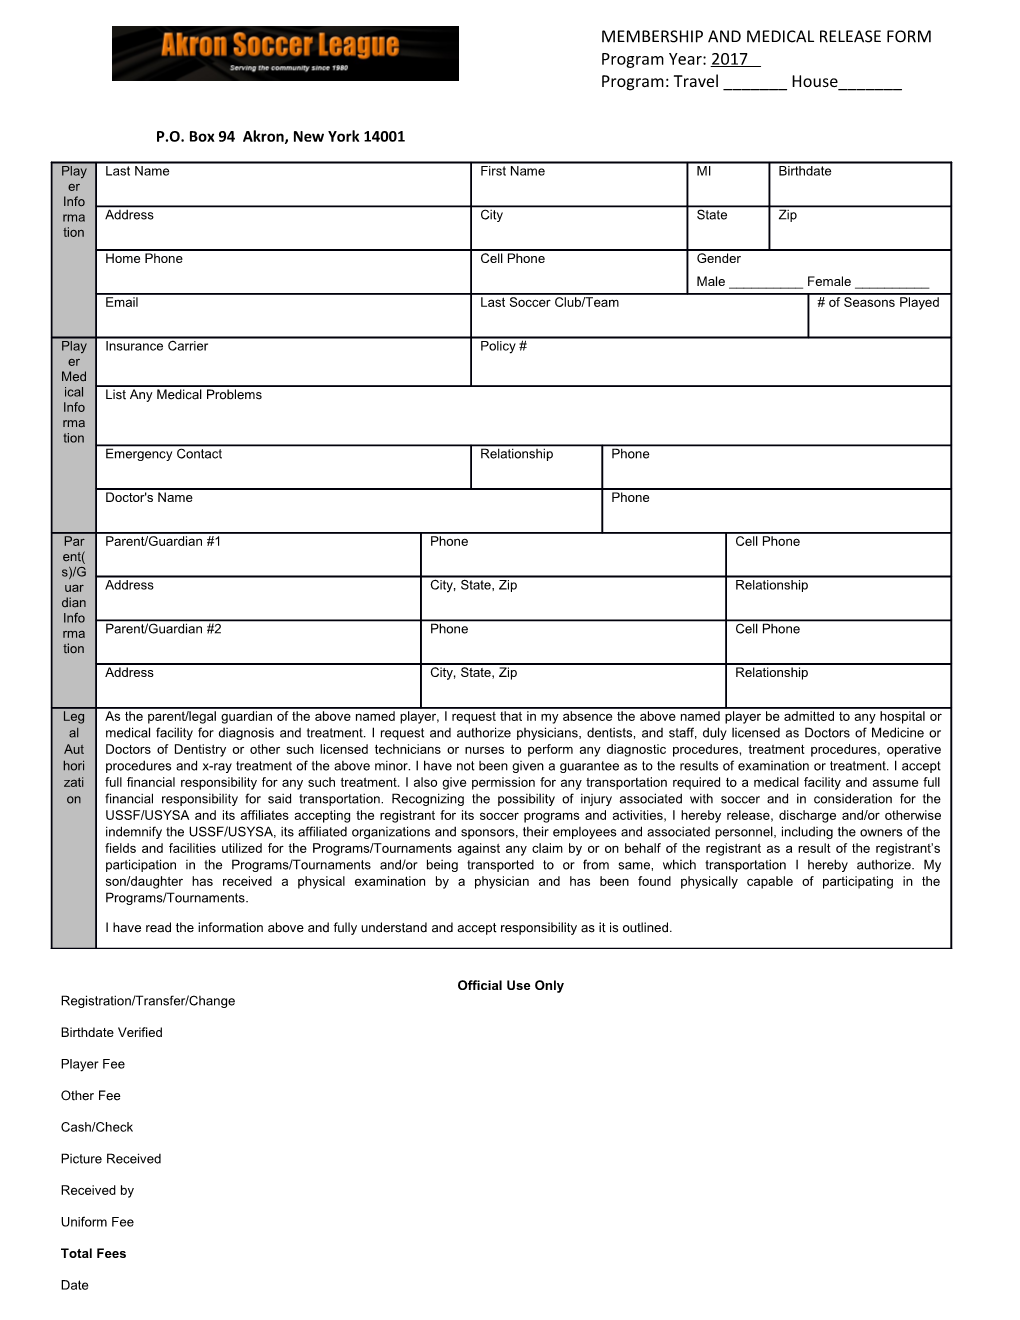 Membership and Medical Release Form